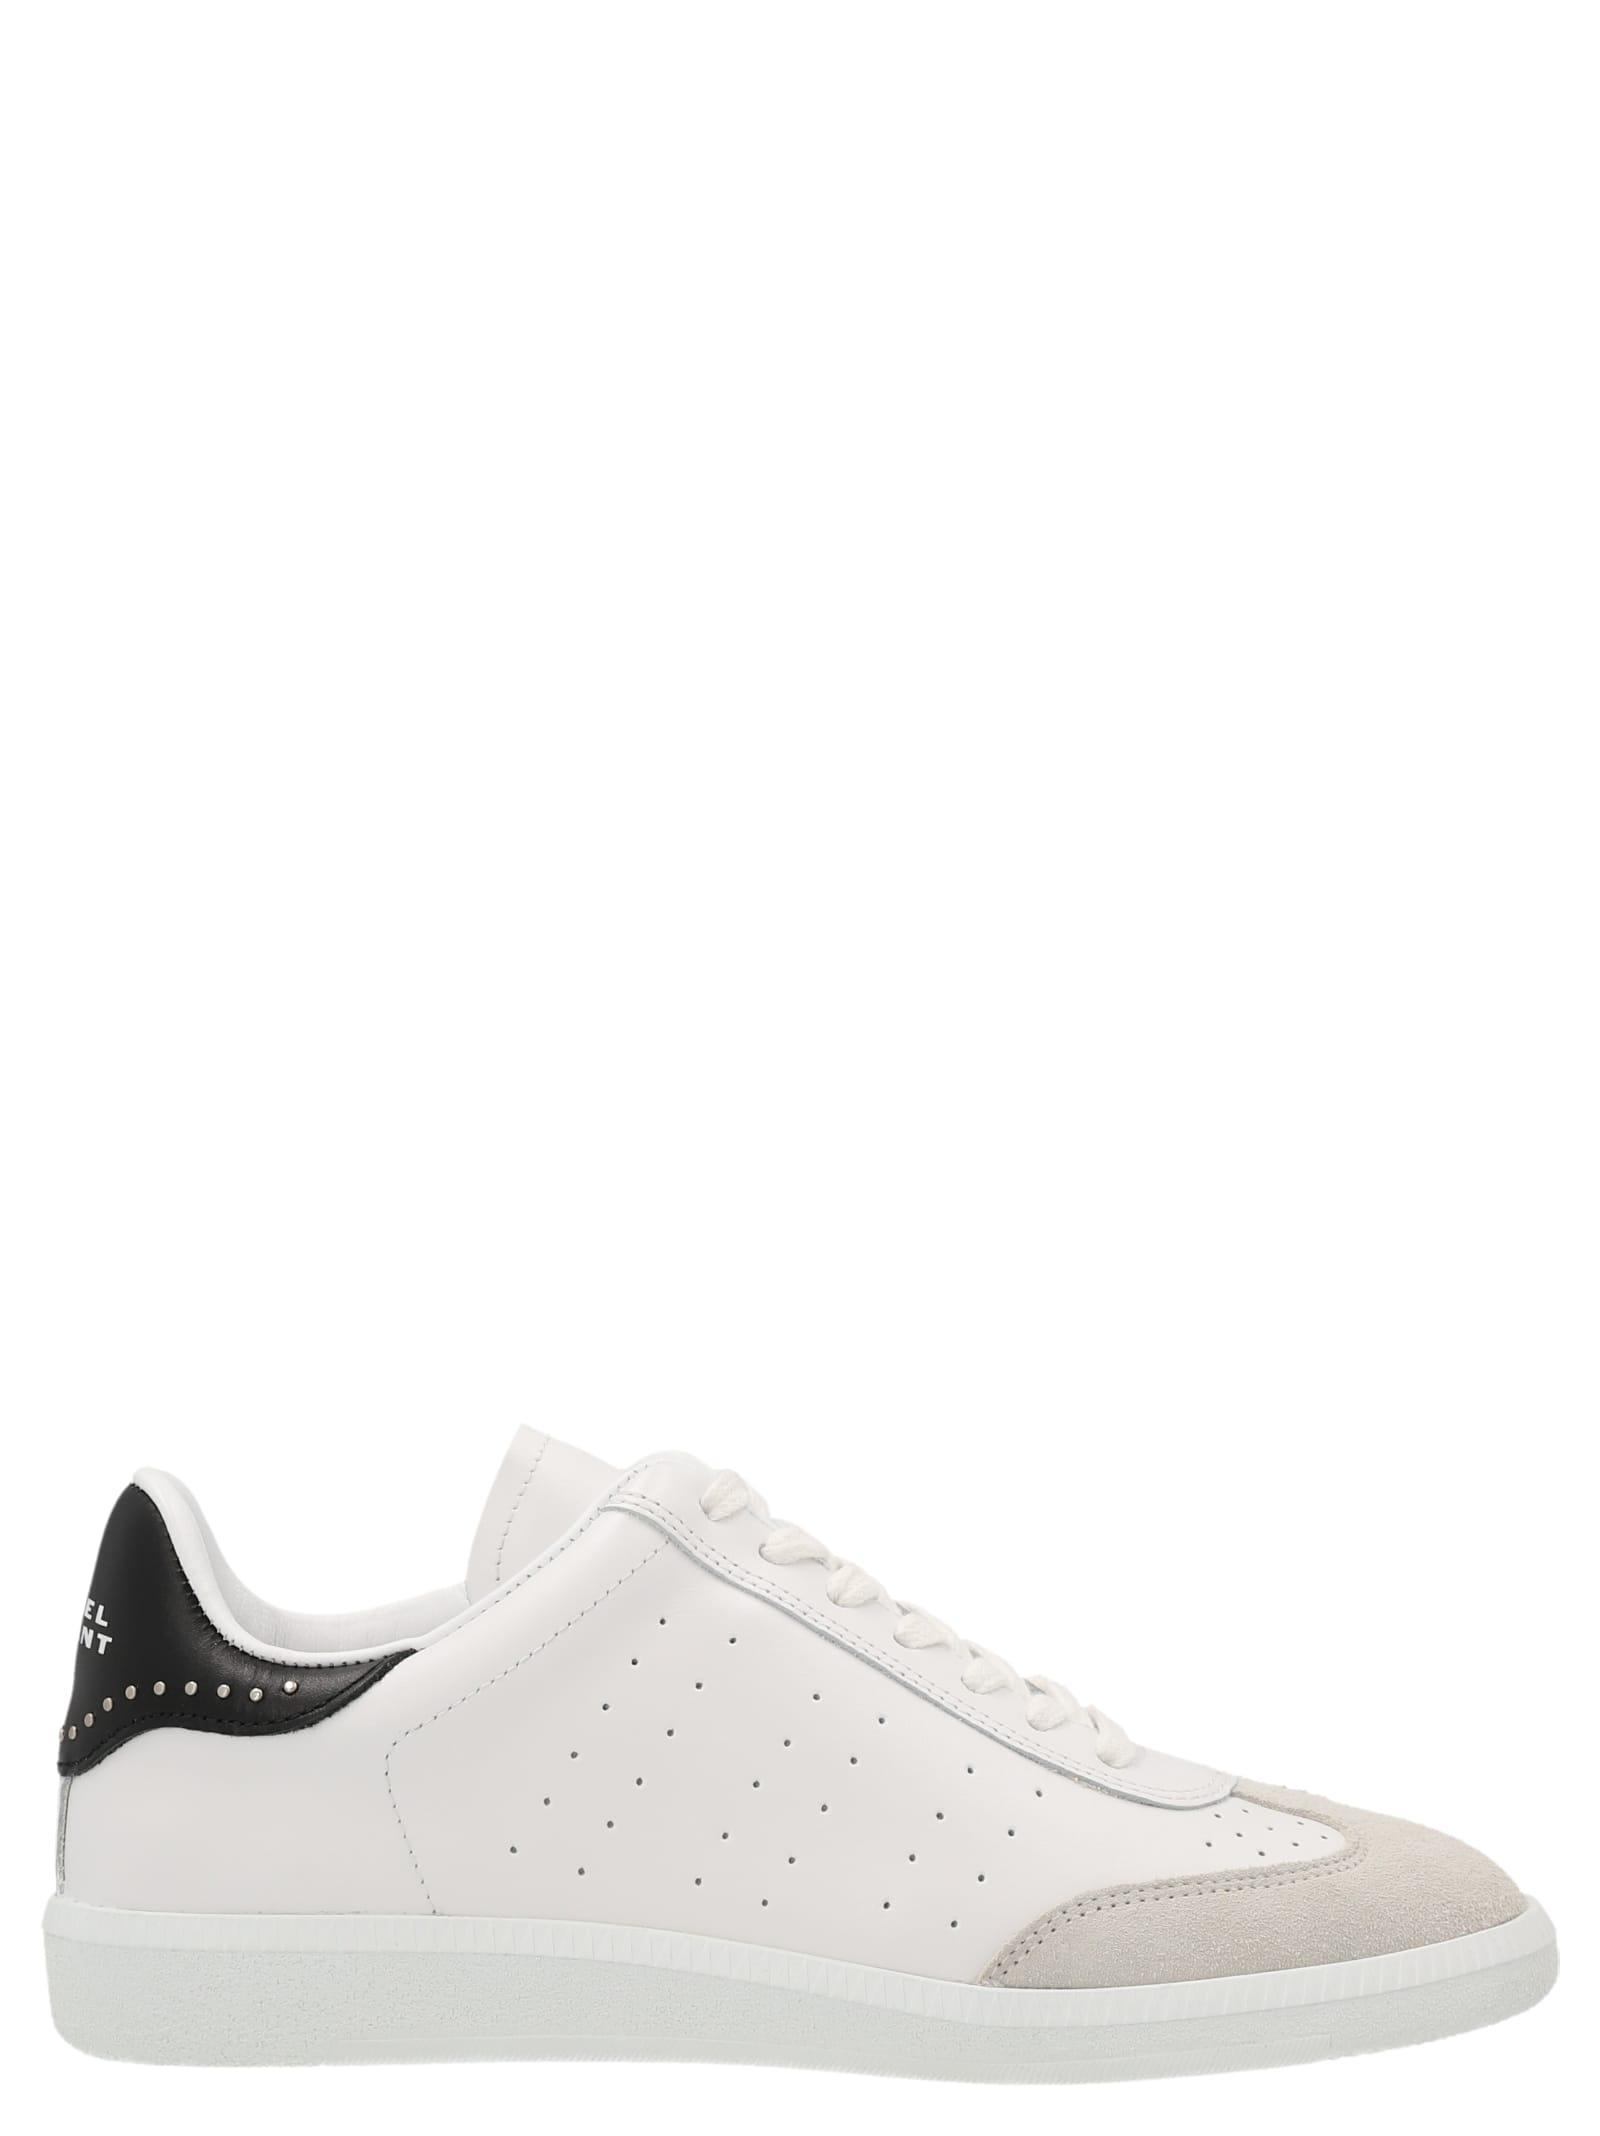 Isabel Marant 'bryce' Sneakers in White | Lyst